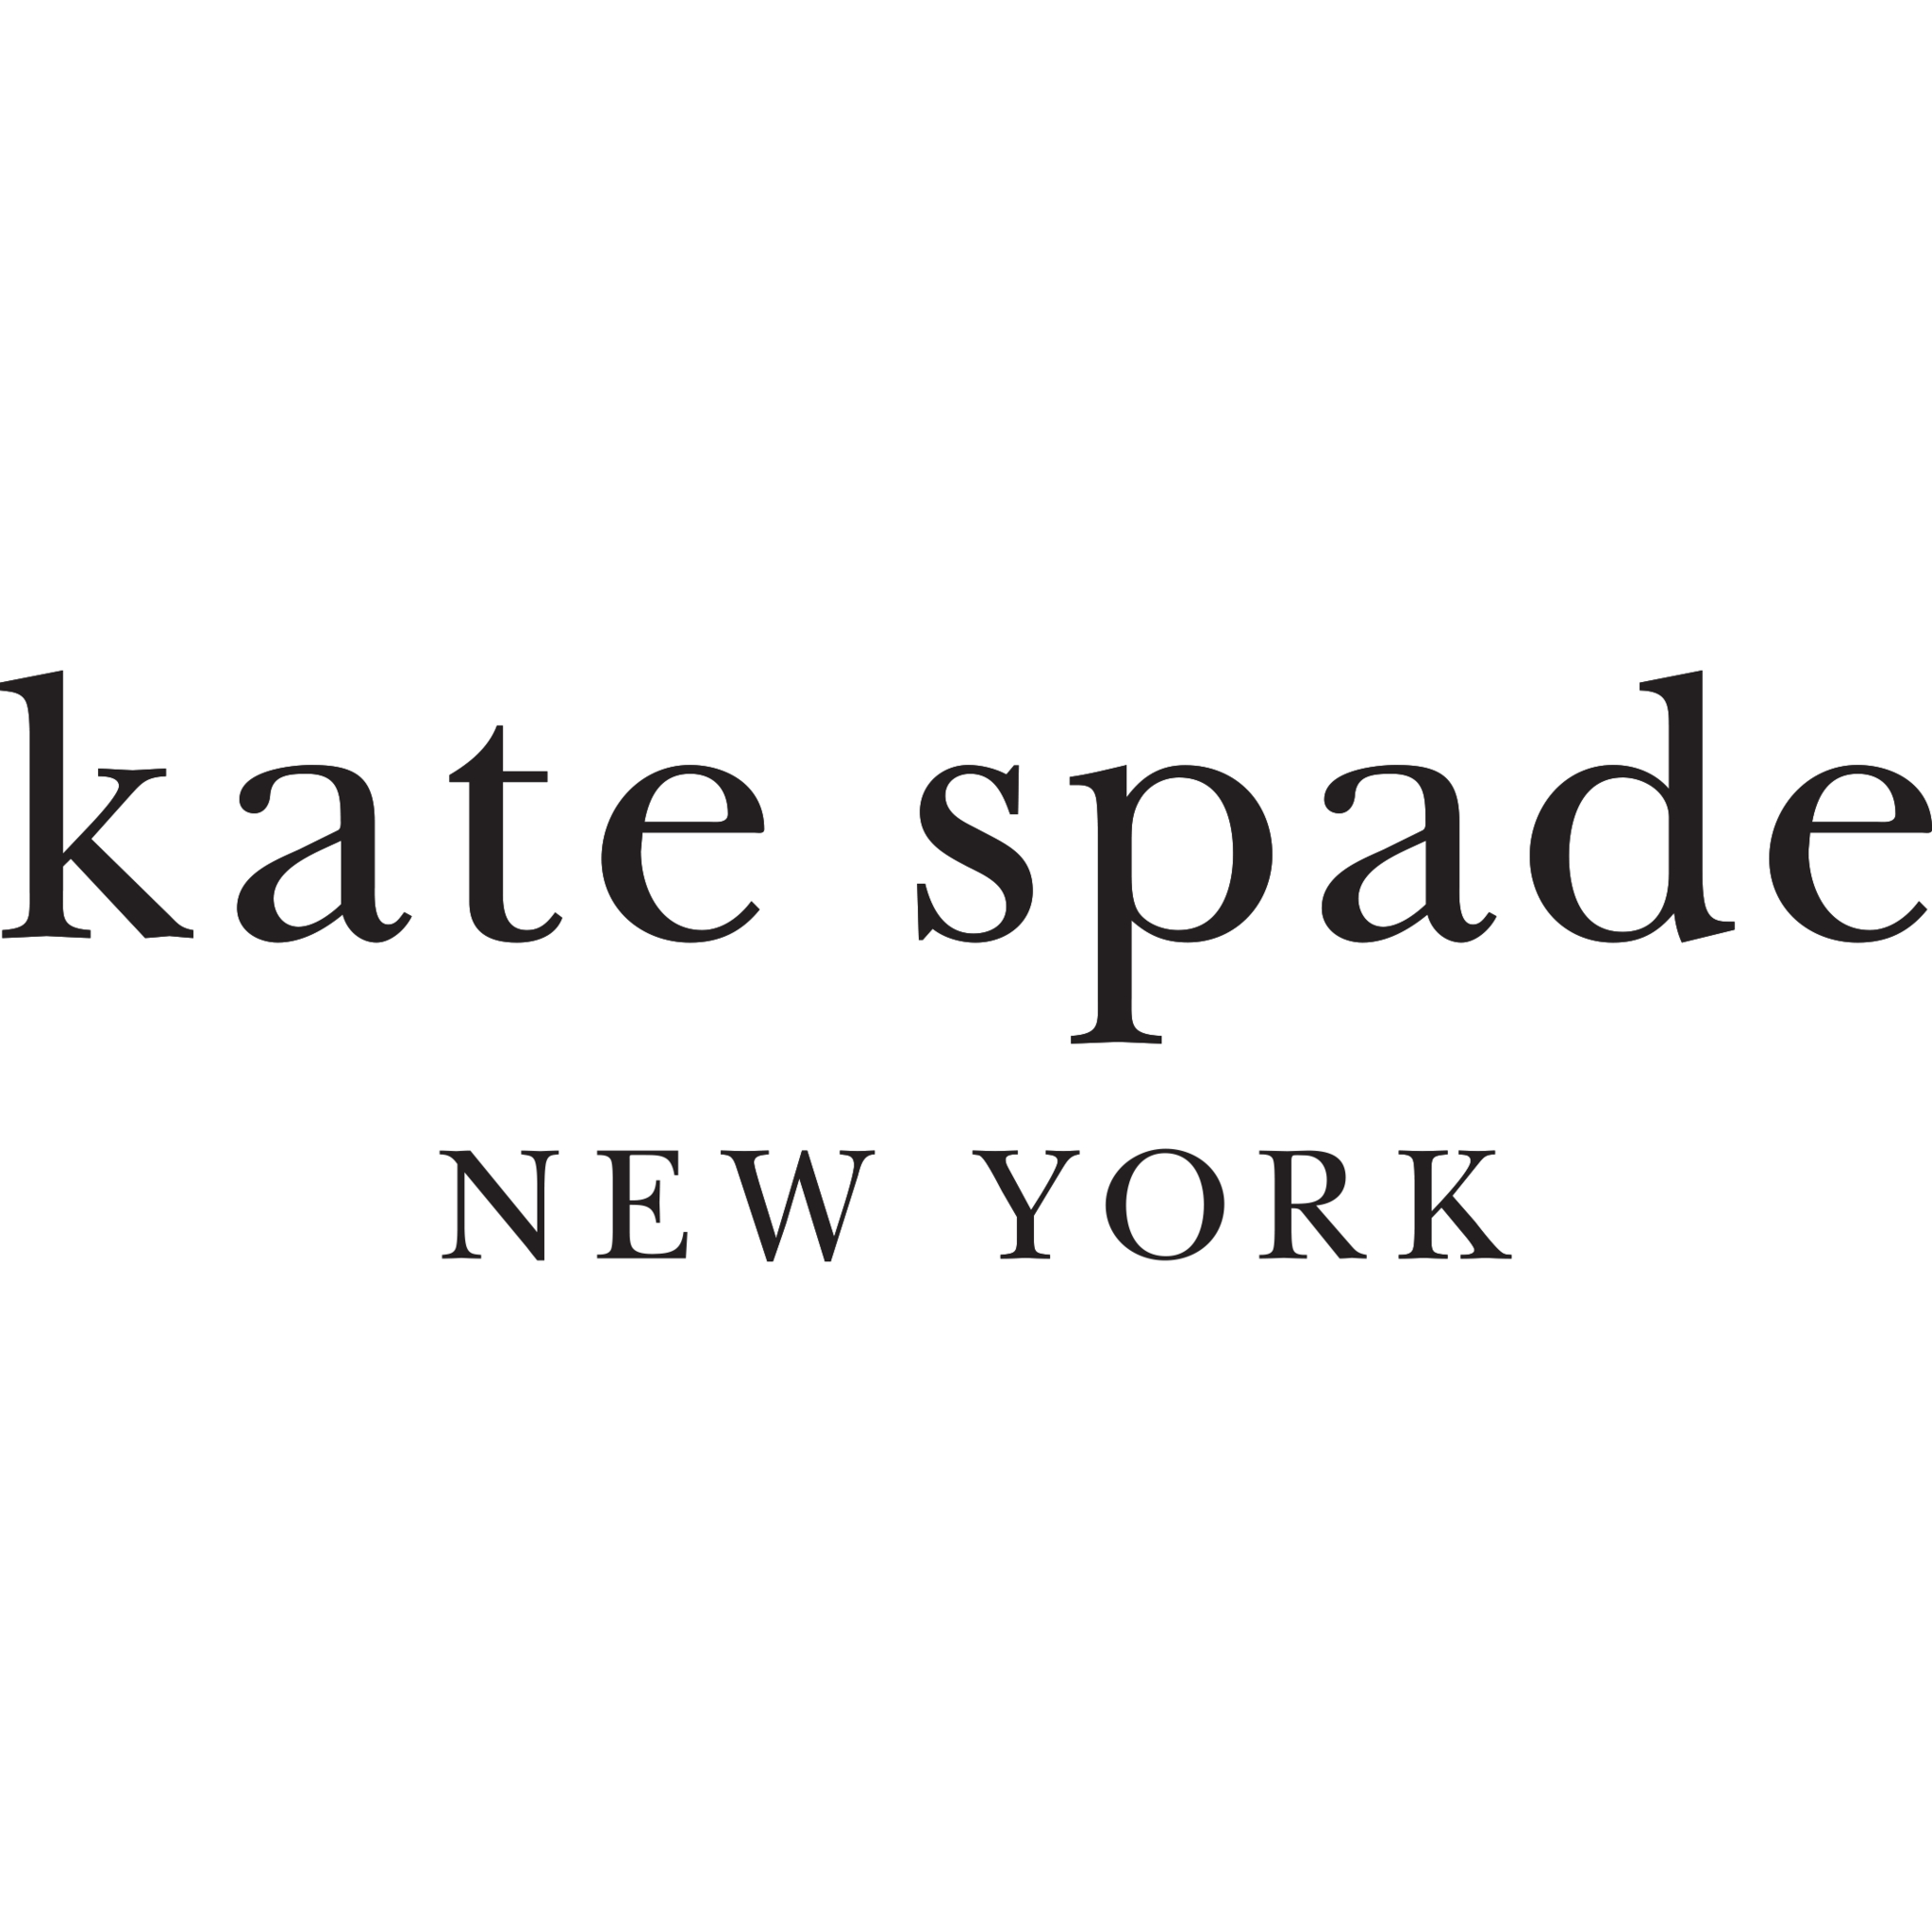 Kate Spade - Women's Clothing Stores